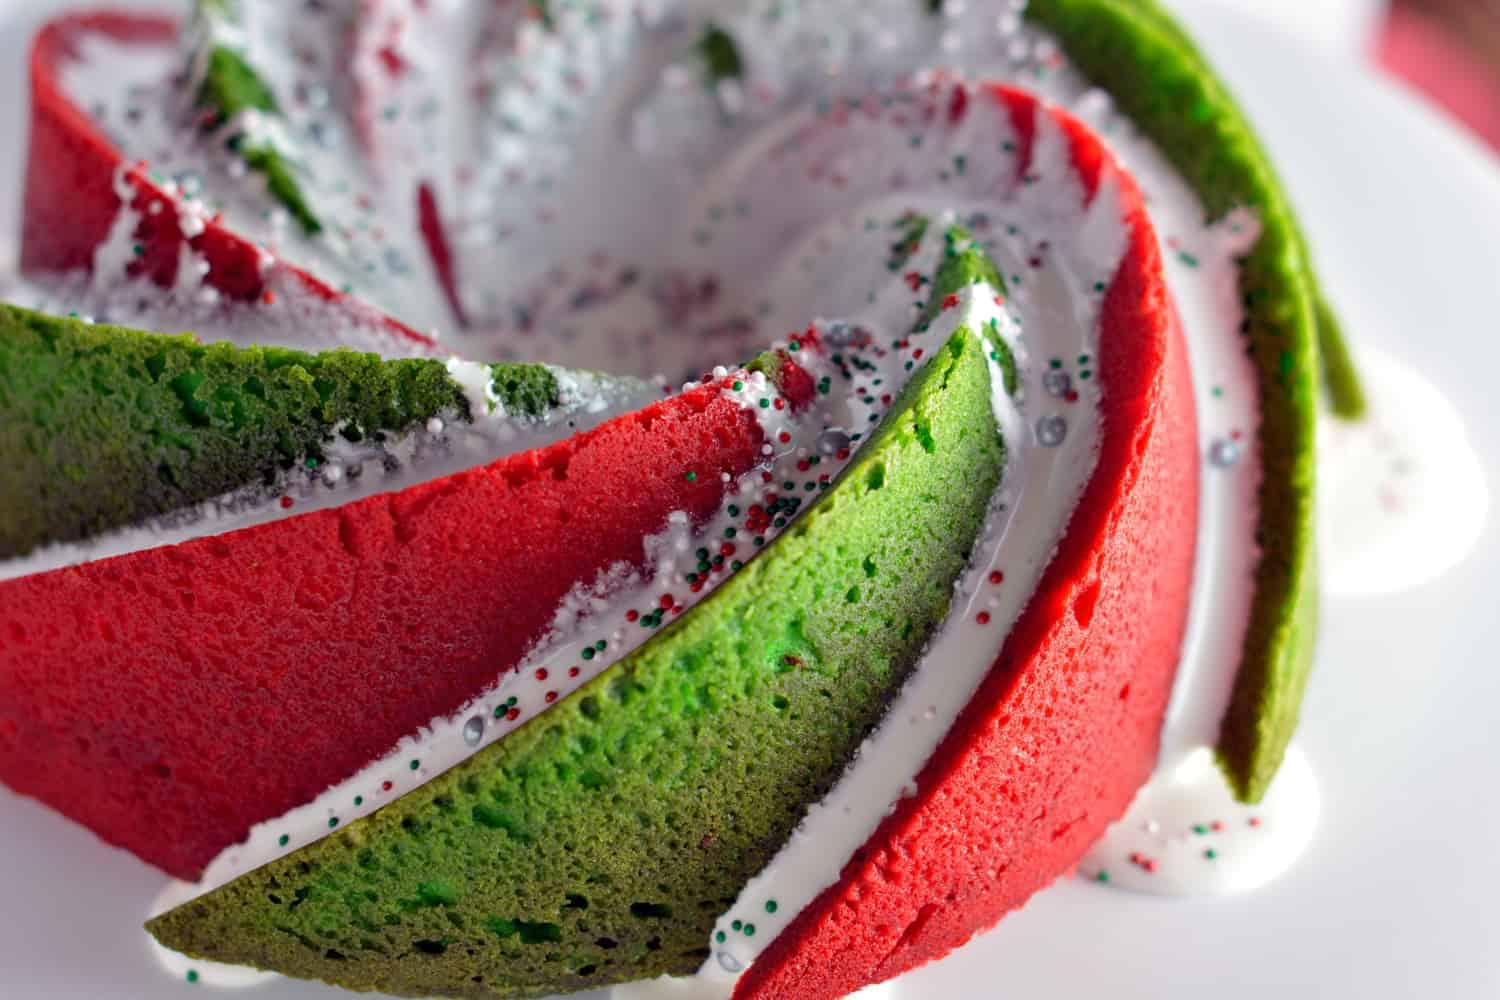 12 Holiday Bundt Cake Recipes, Holiday Loaf Cake Ideas, Holiday Recipes:  Menus, Desserts, Party Ideas from Food Network